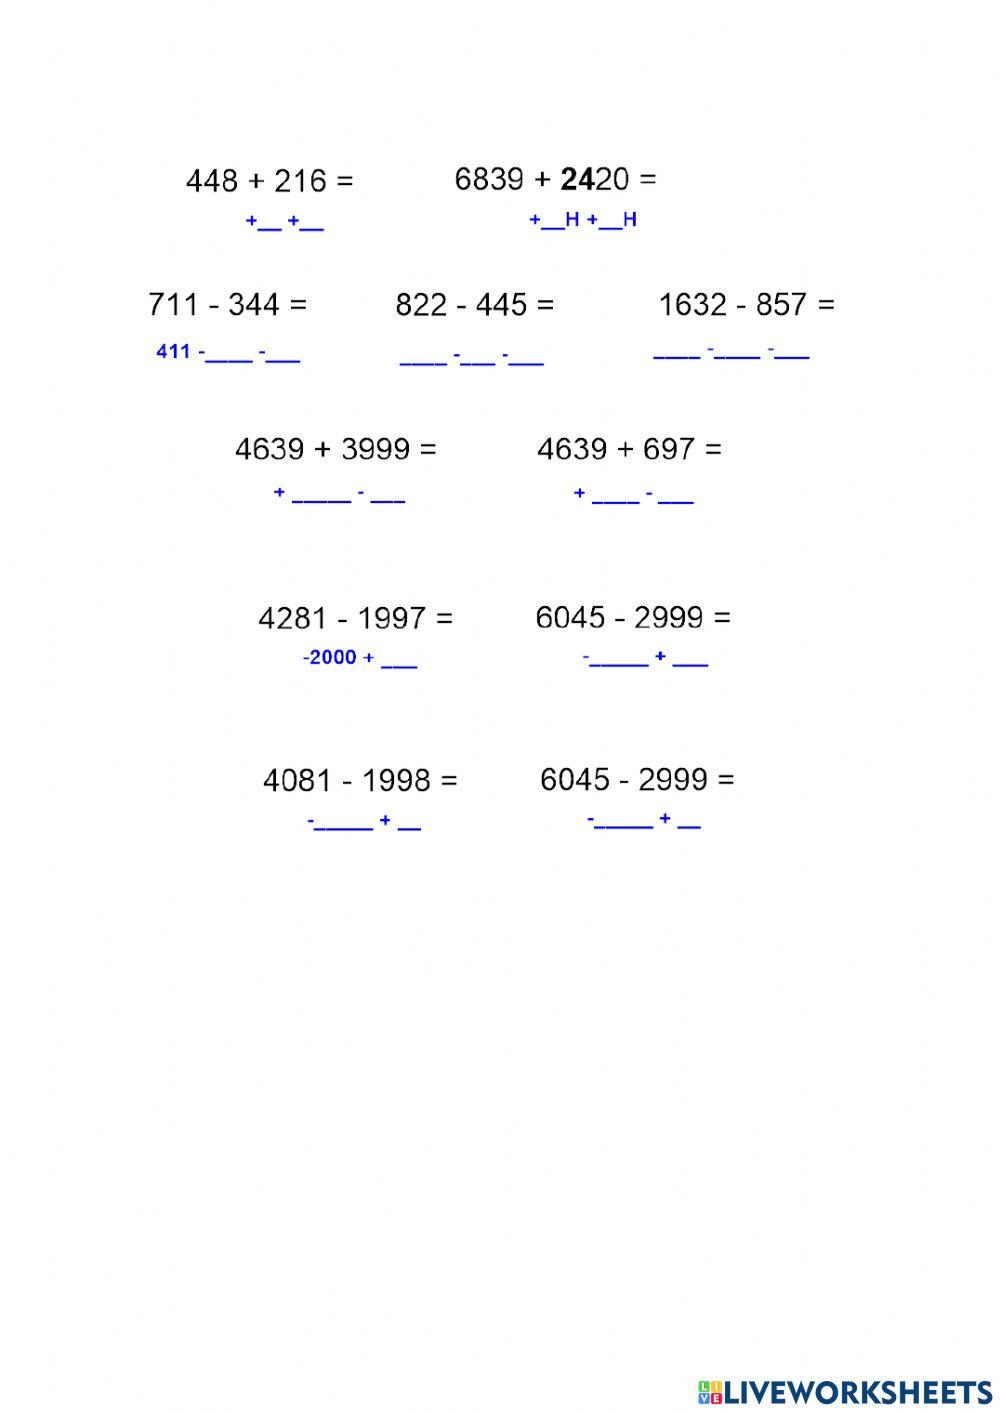 Subtraction and Addition Mental Arithmatic Set 2